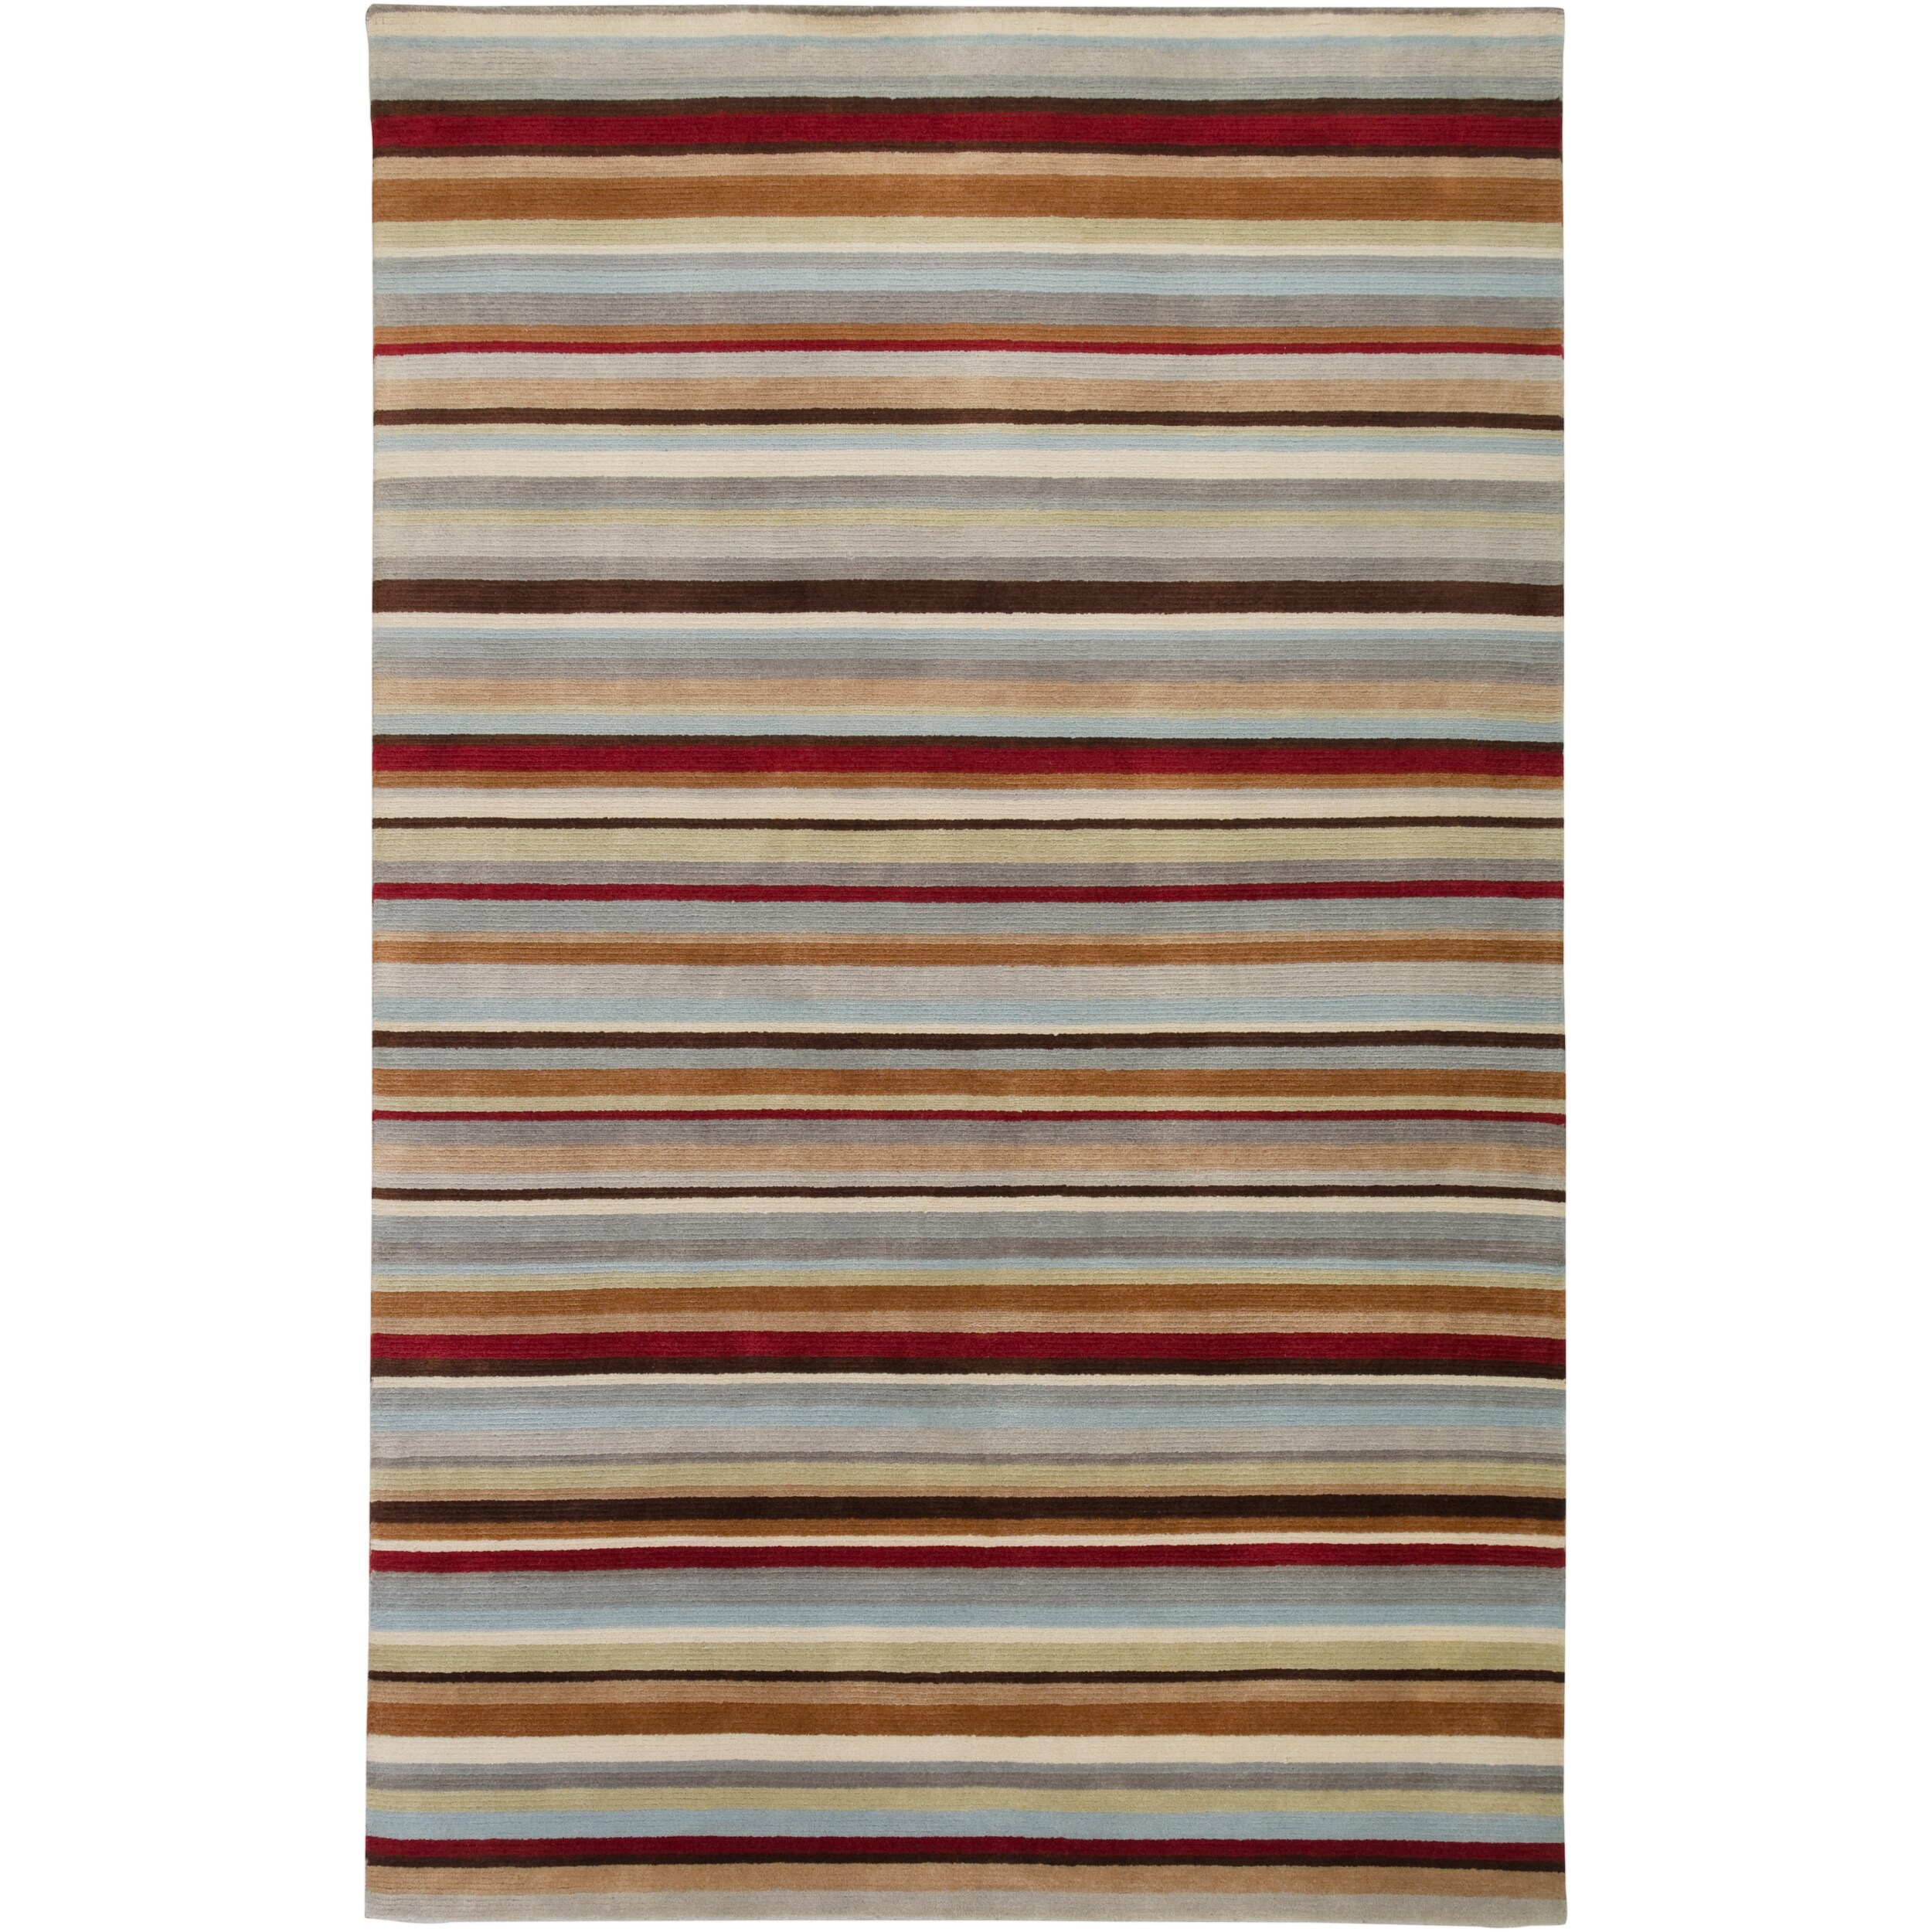 Hand knotted Multi Colored Striped Banbury Wool Rug (5 X 8)